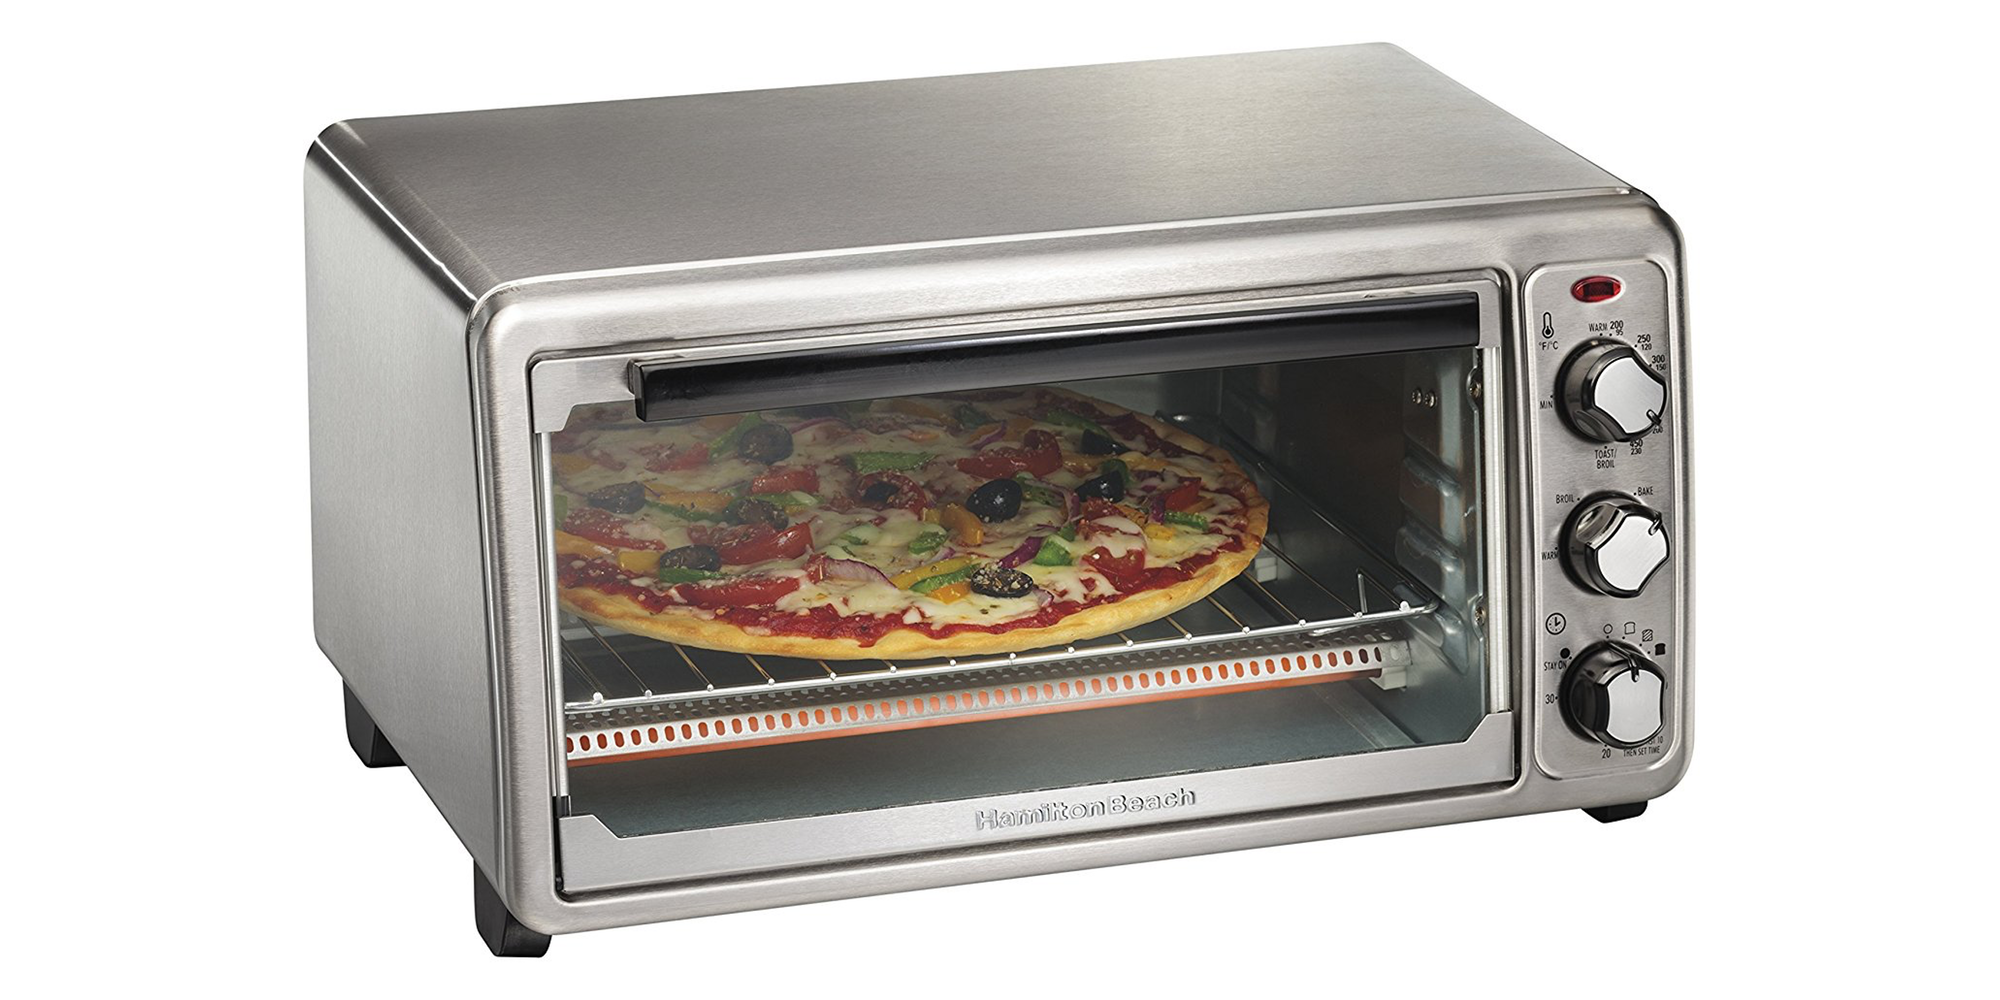 Hamilton Beach Stainless Steal Toaster Oven falls to Amazon low at $40